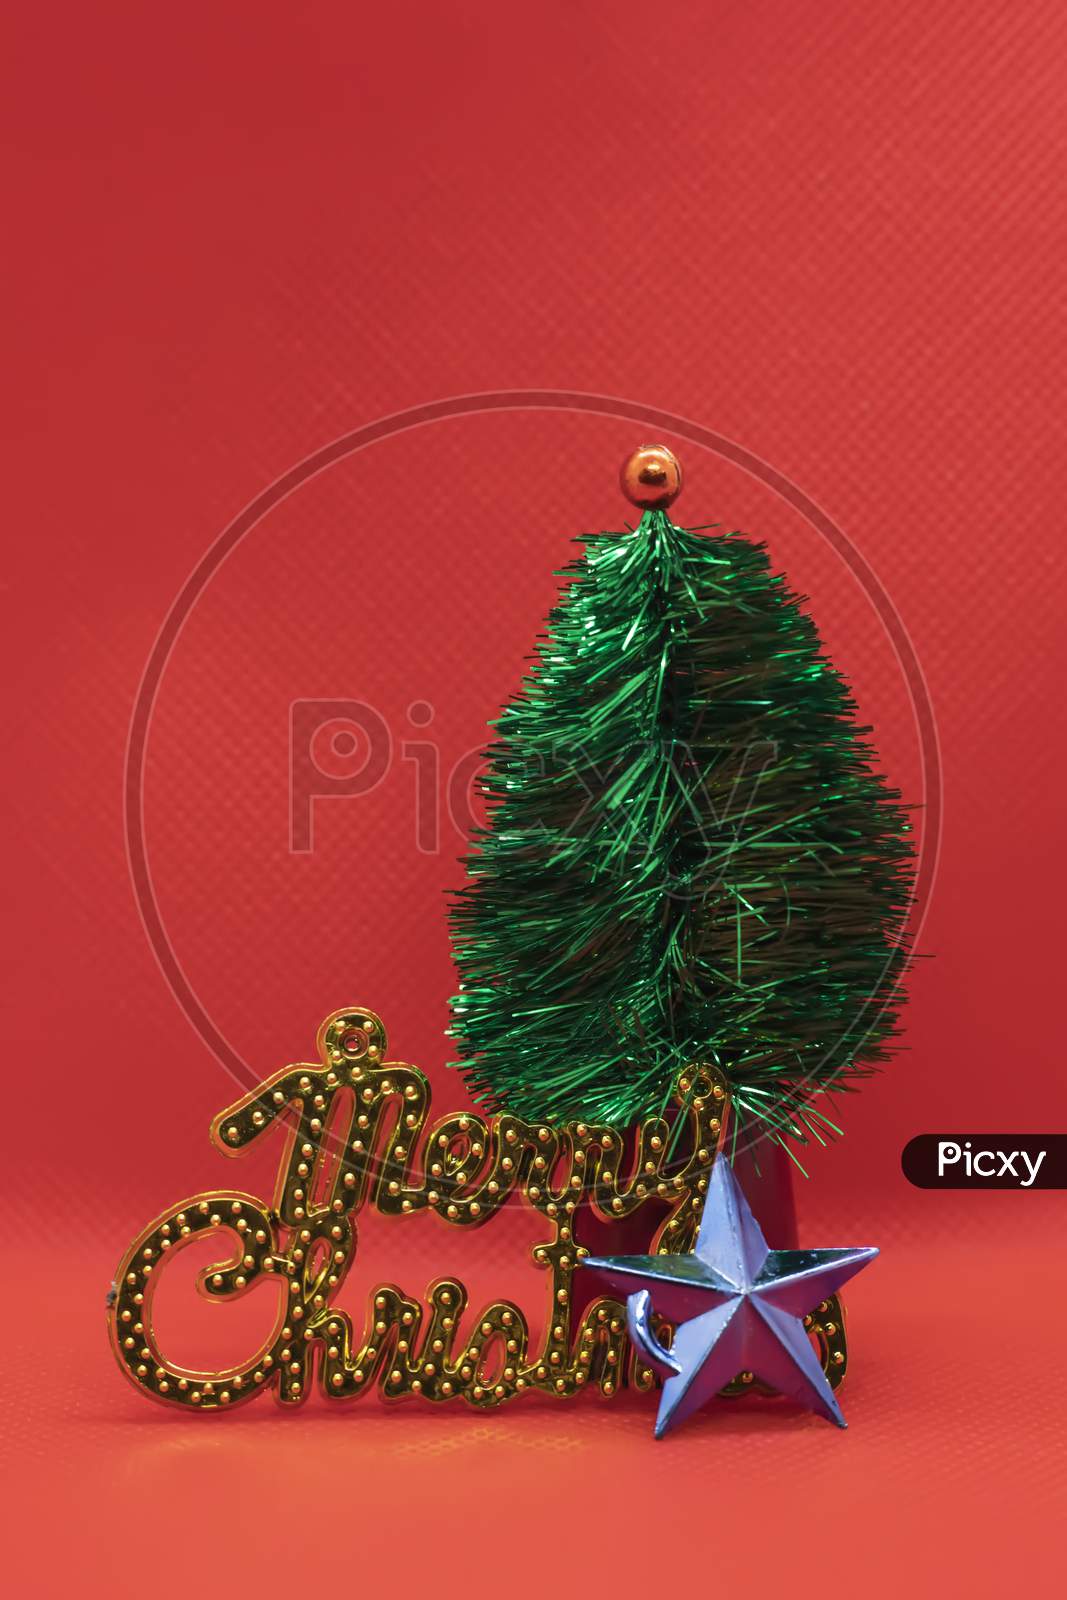 Christmas Tree With Star And Merry Christmas Text On Red Studio Background. Holiday Festive Celebration Greeting Card With Copy Space